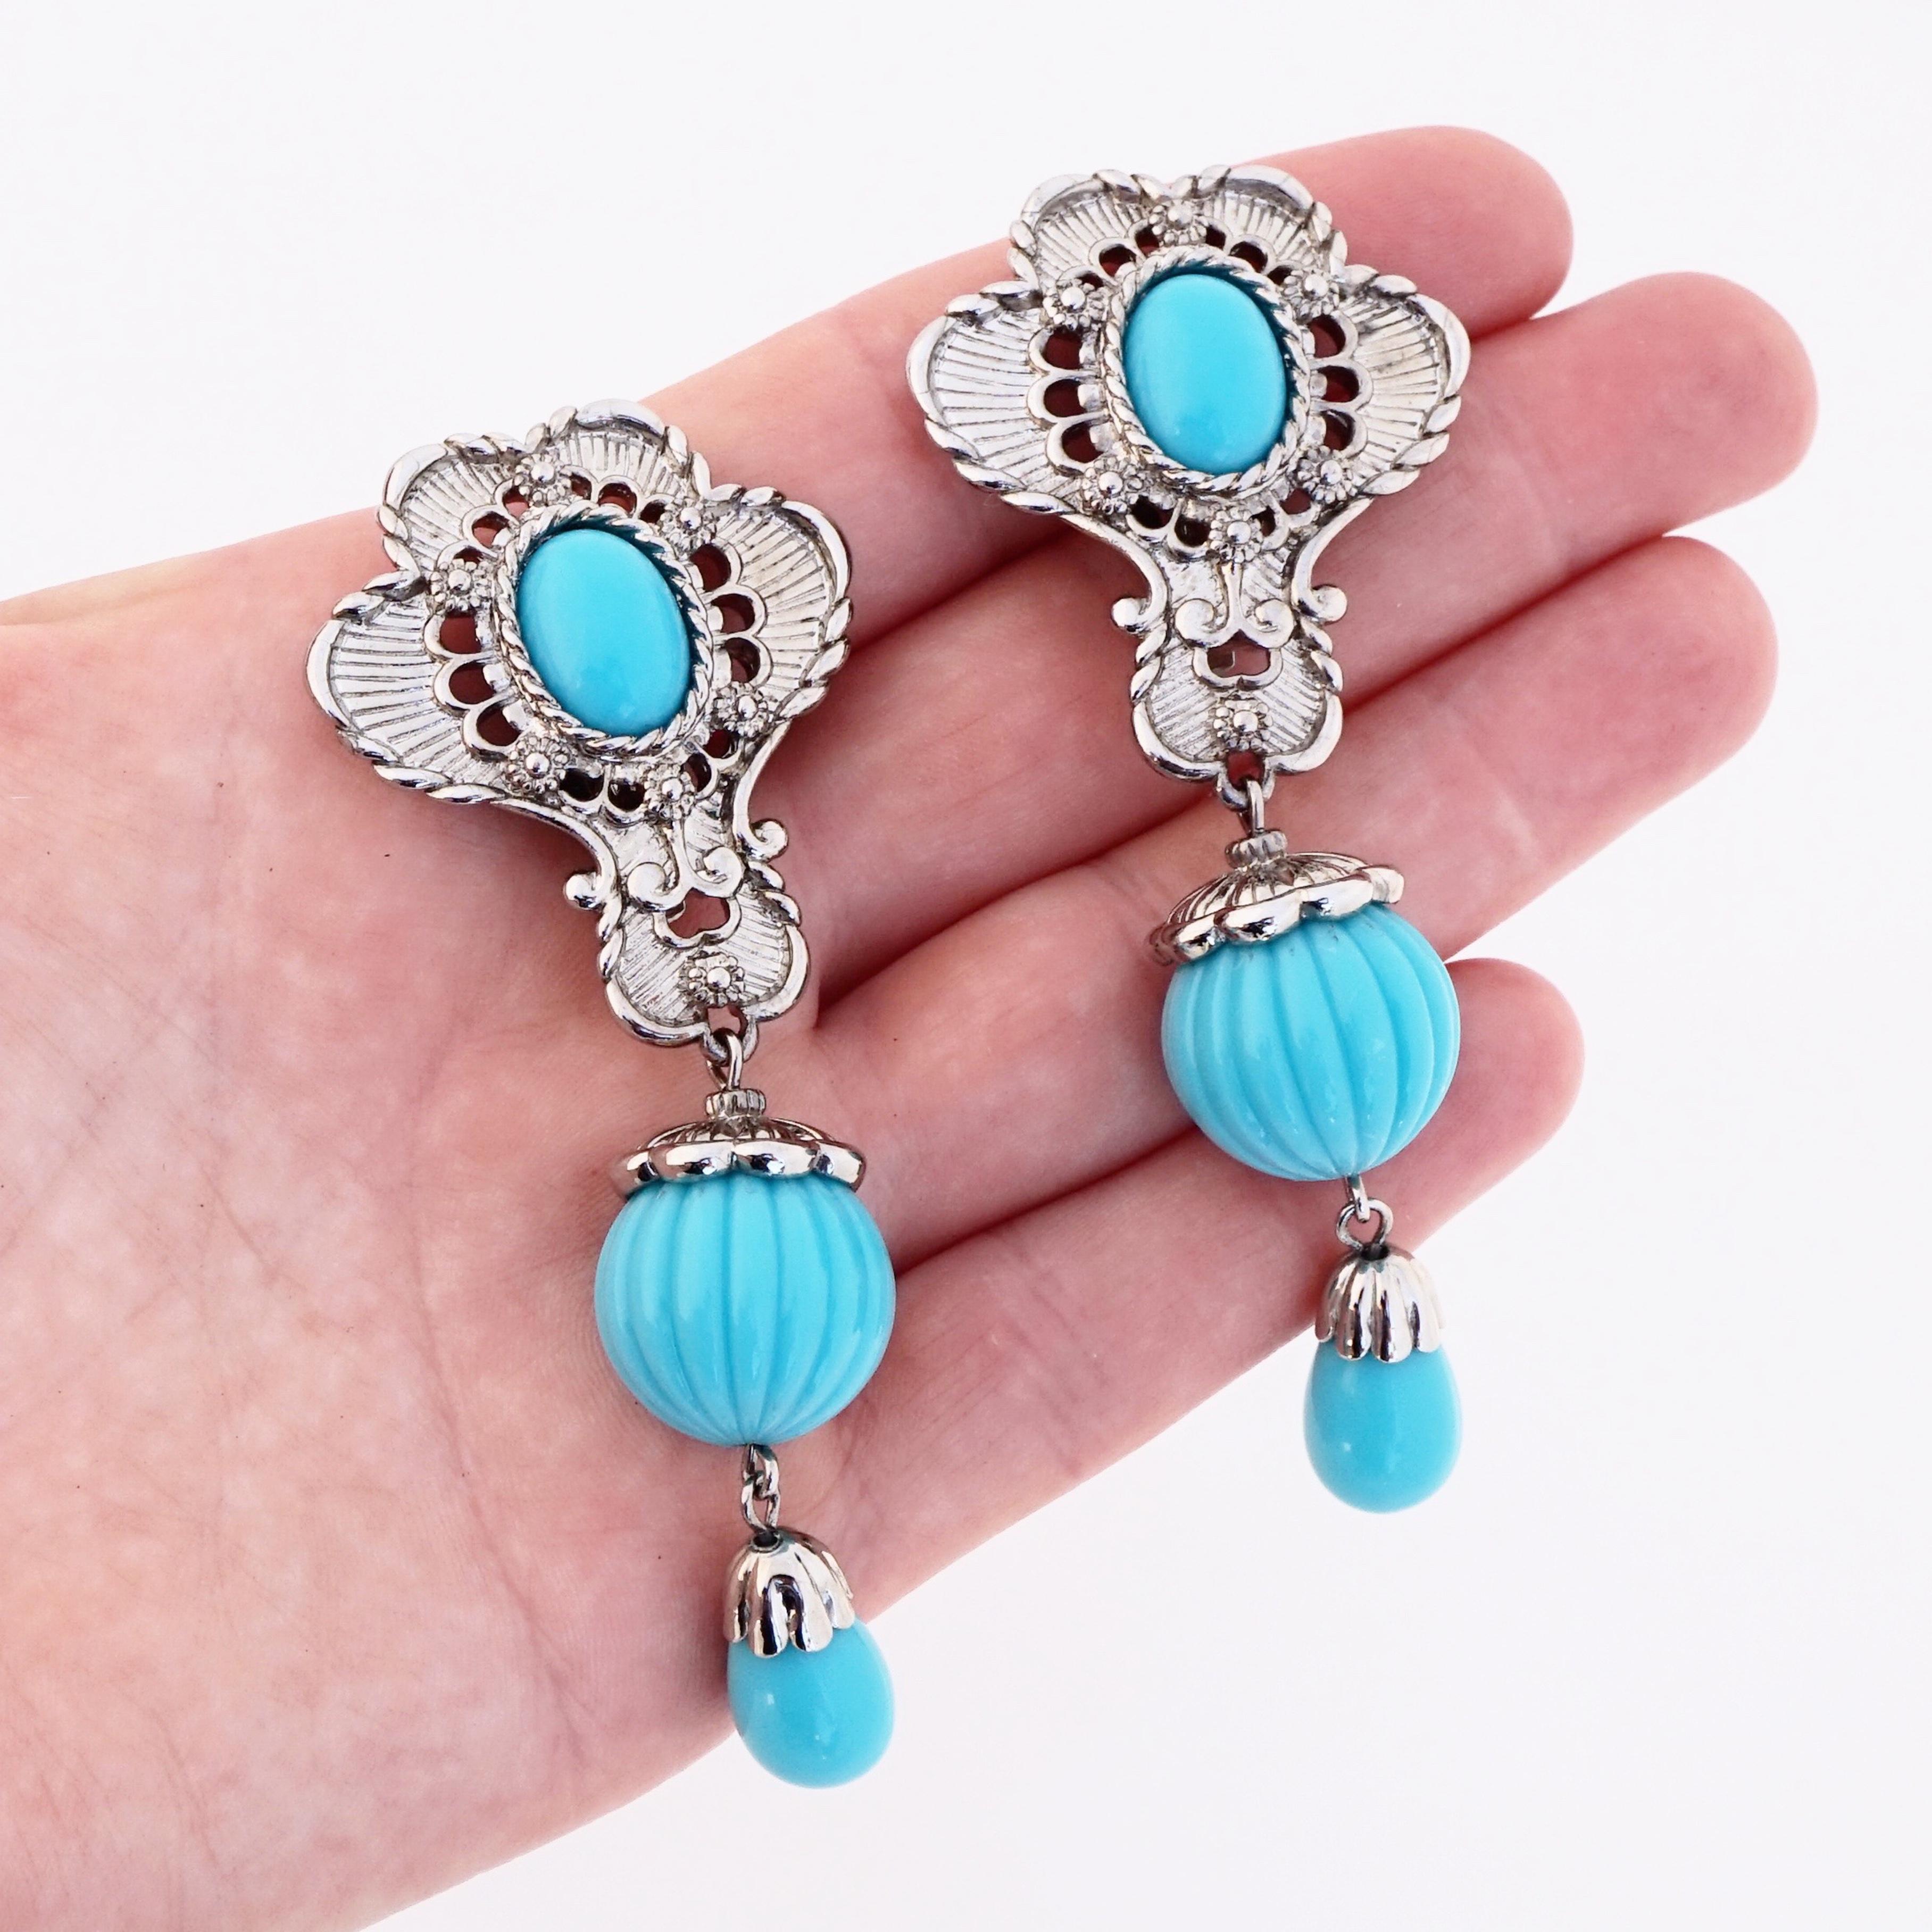 Women's Ornate Silver Drop Earrings With Faux Turquoise By Jose & Maria Barrera, 1980s For Sale